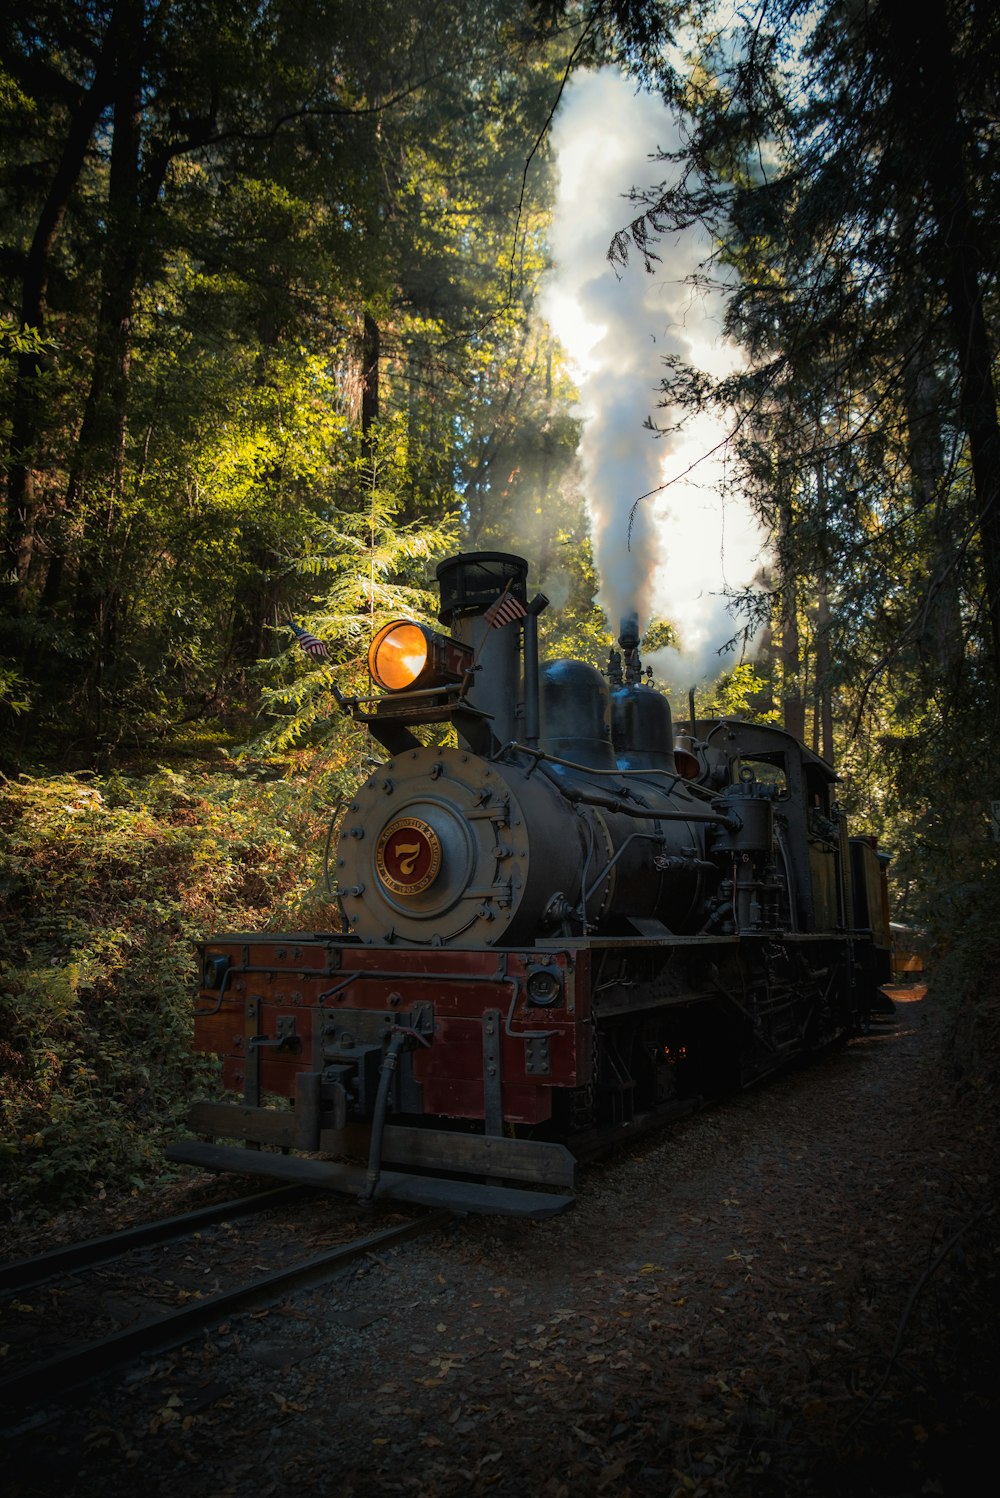 Steam locomotive surrounded by forest trees during daytime